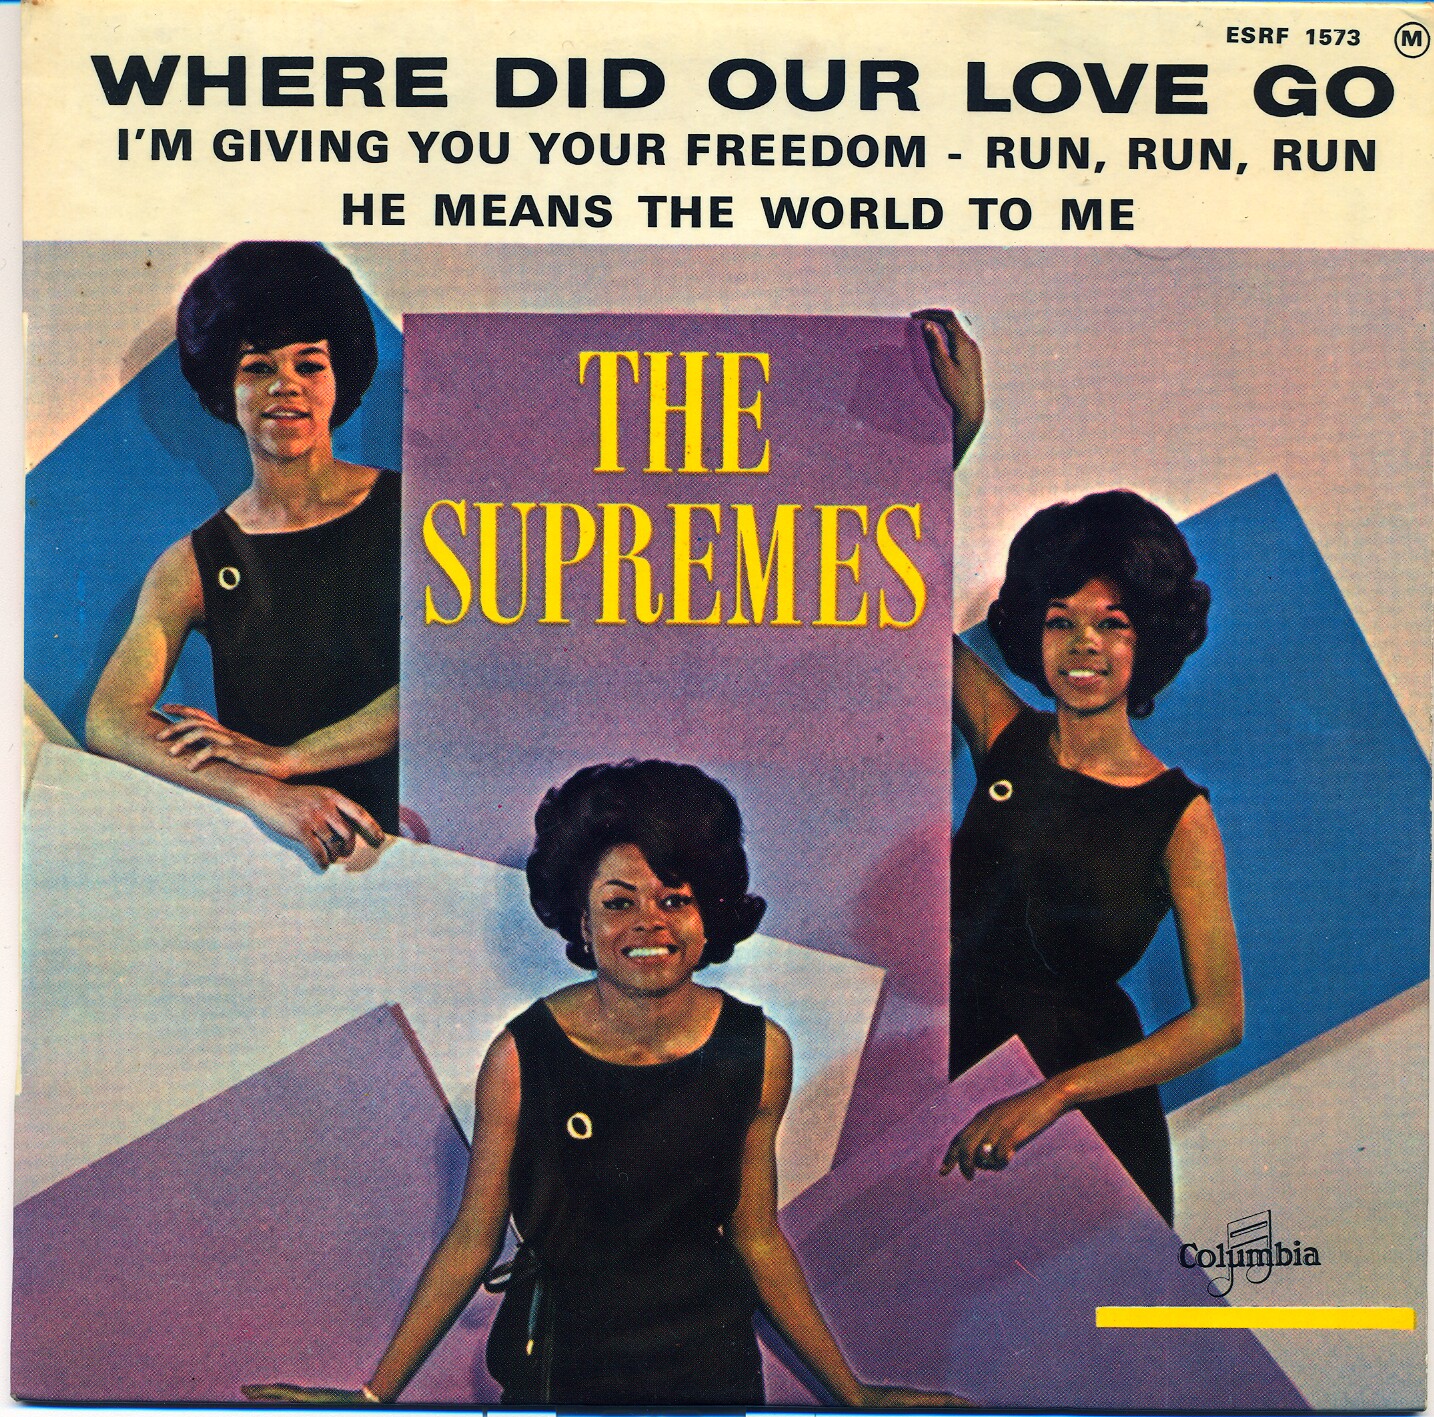 Love go on песня. Группа the Supremes. Diana Ross & the Supremes Baby Love обложка. Обложка альбома the Supremes a go go 1966. The Supremes where did our Love go.